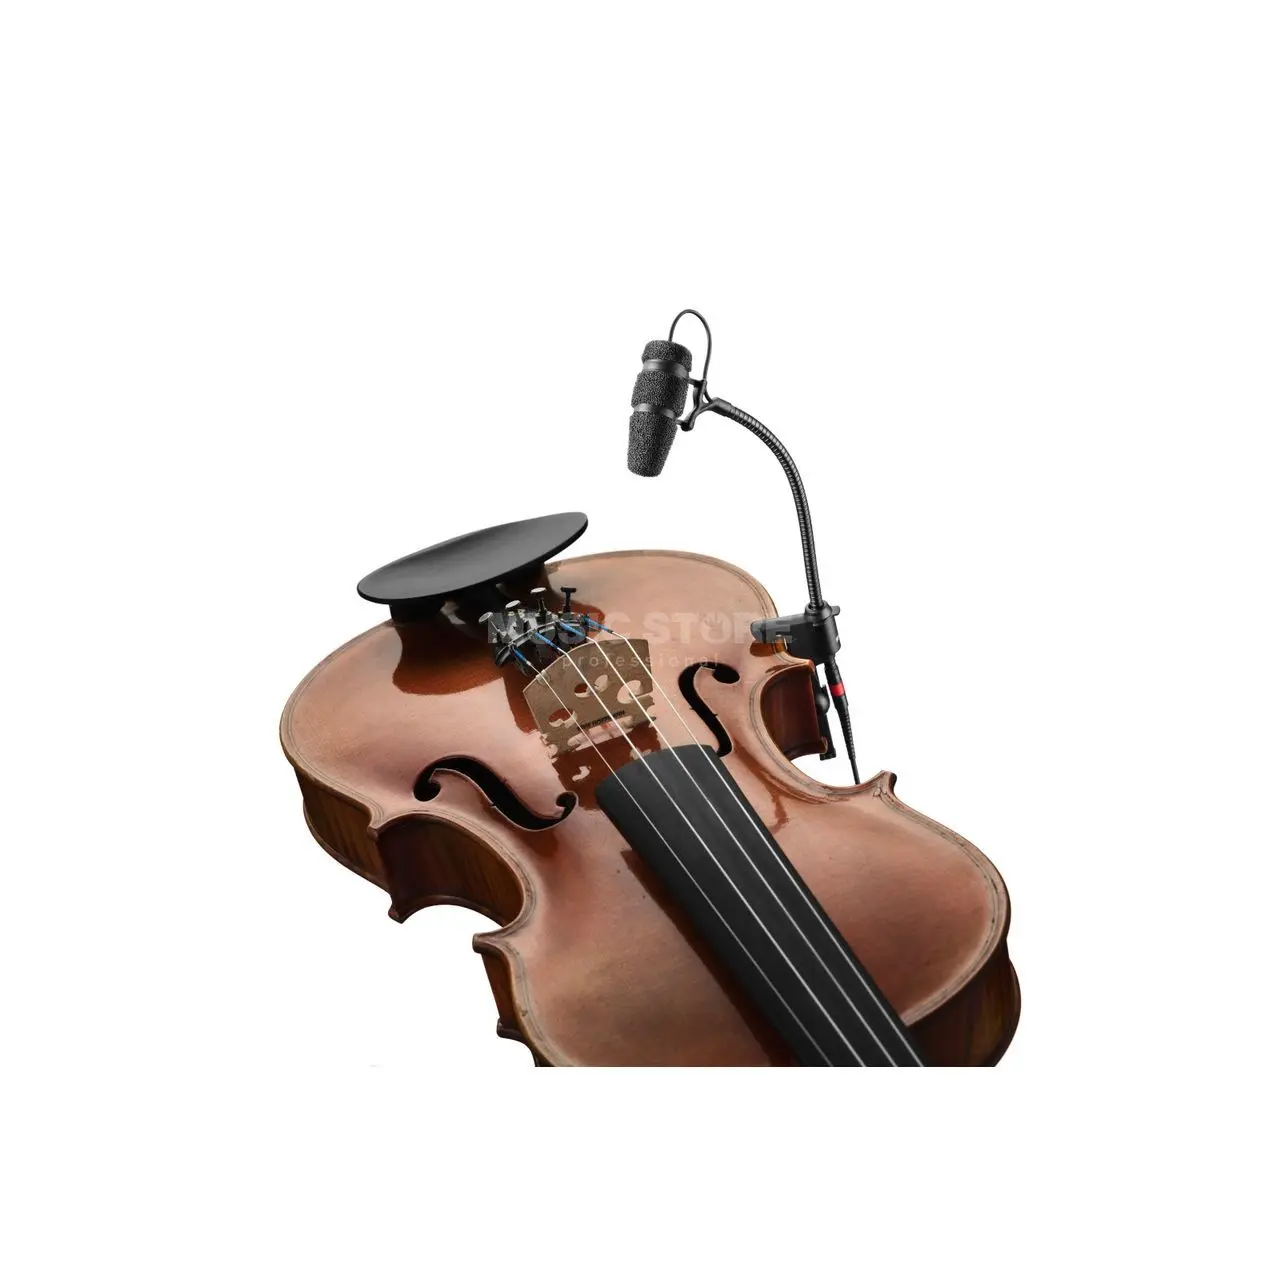 dpa violin clip - What is the instrument microphone clip for violin and mandolin VC4099